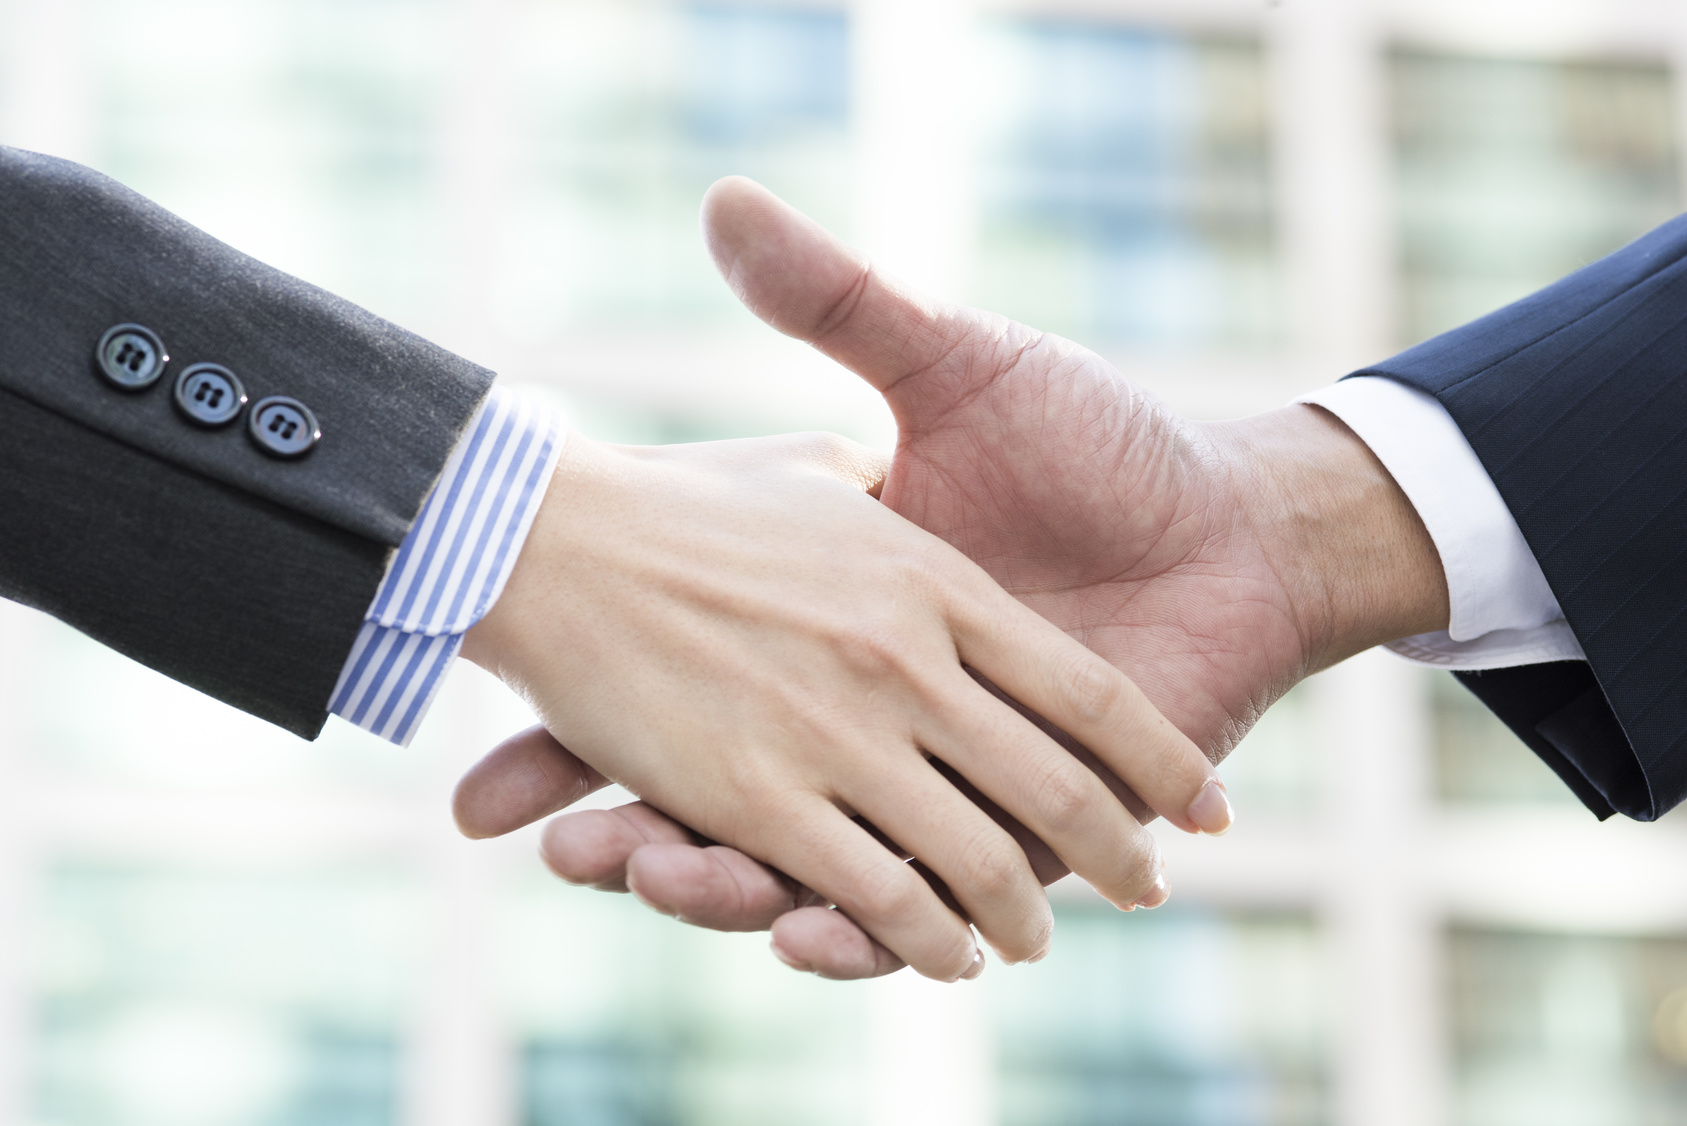 The handshake to have businessman